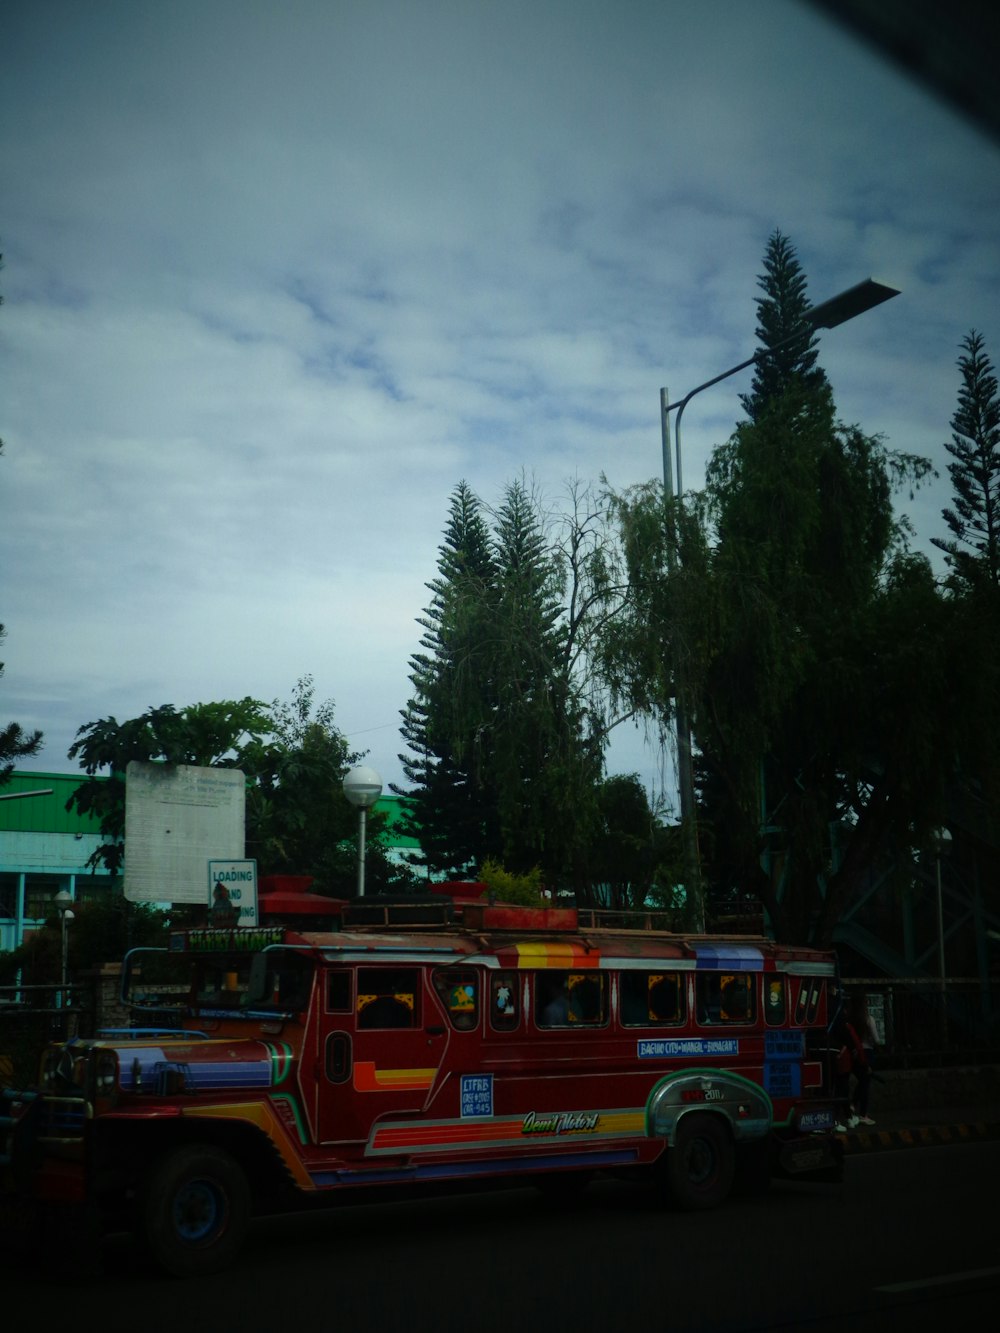 a red bus driving down a street next to a forest